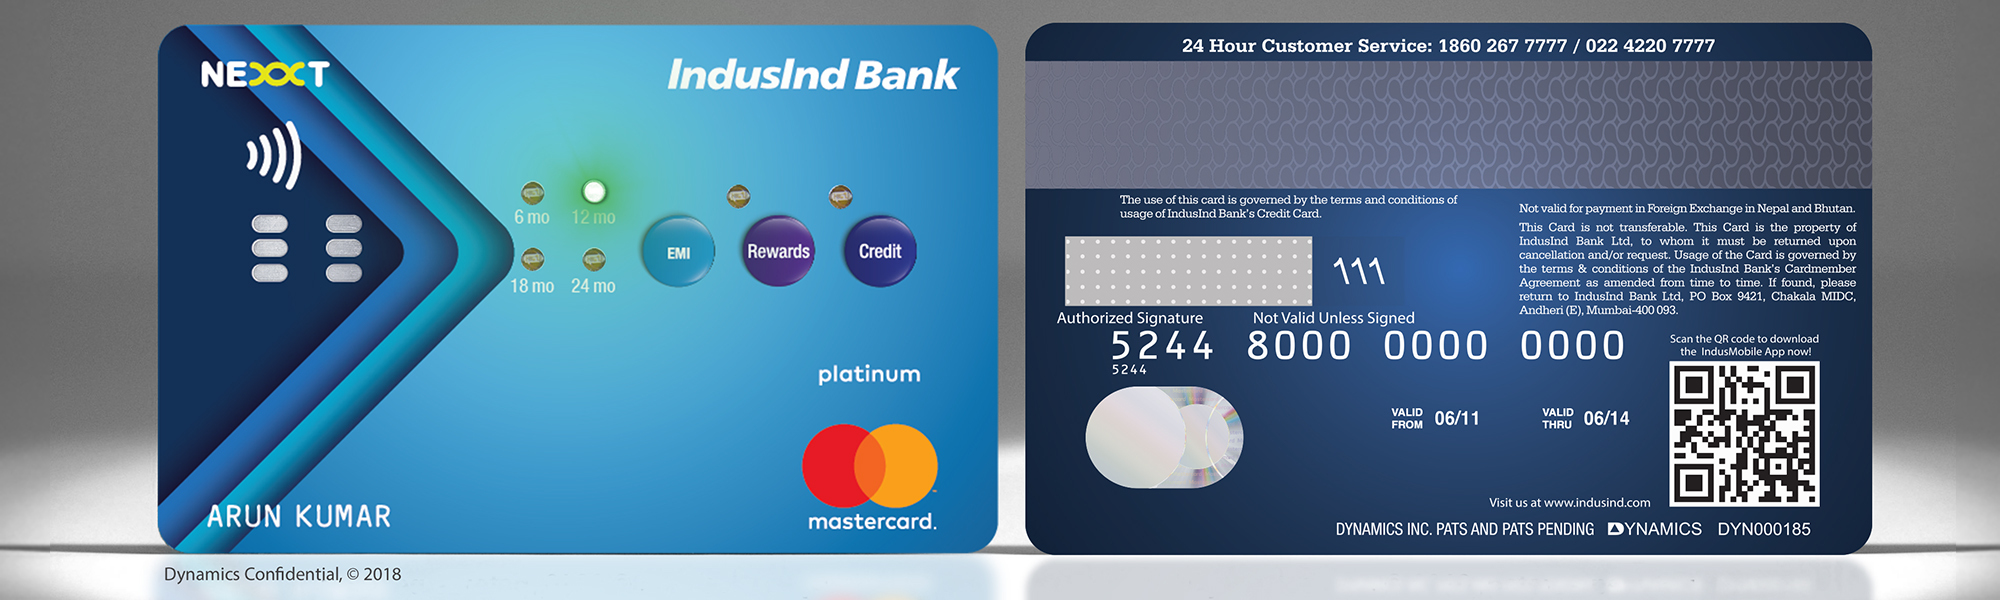 IndusInd Bank and Dynamics Launch the Credit Card – India's First Battery-Powered Interactive Card | Business Wire